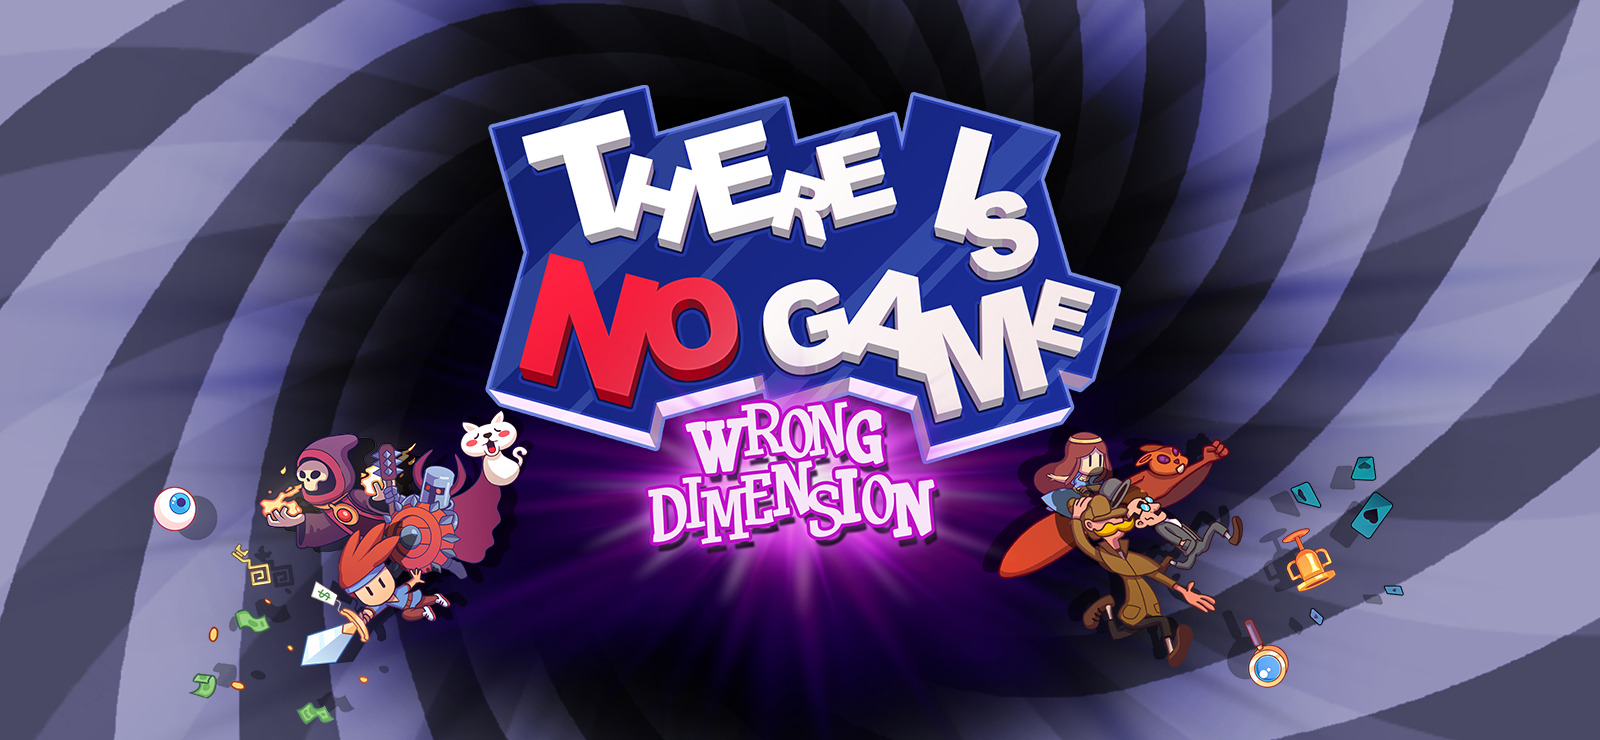 There is no game wrong. There is no game: wrong Dimension игра. DRAWMEAPIXEL. There is no game - wrong Dimension код. There is no game wrong Dimension — DJ game.